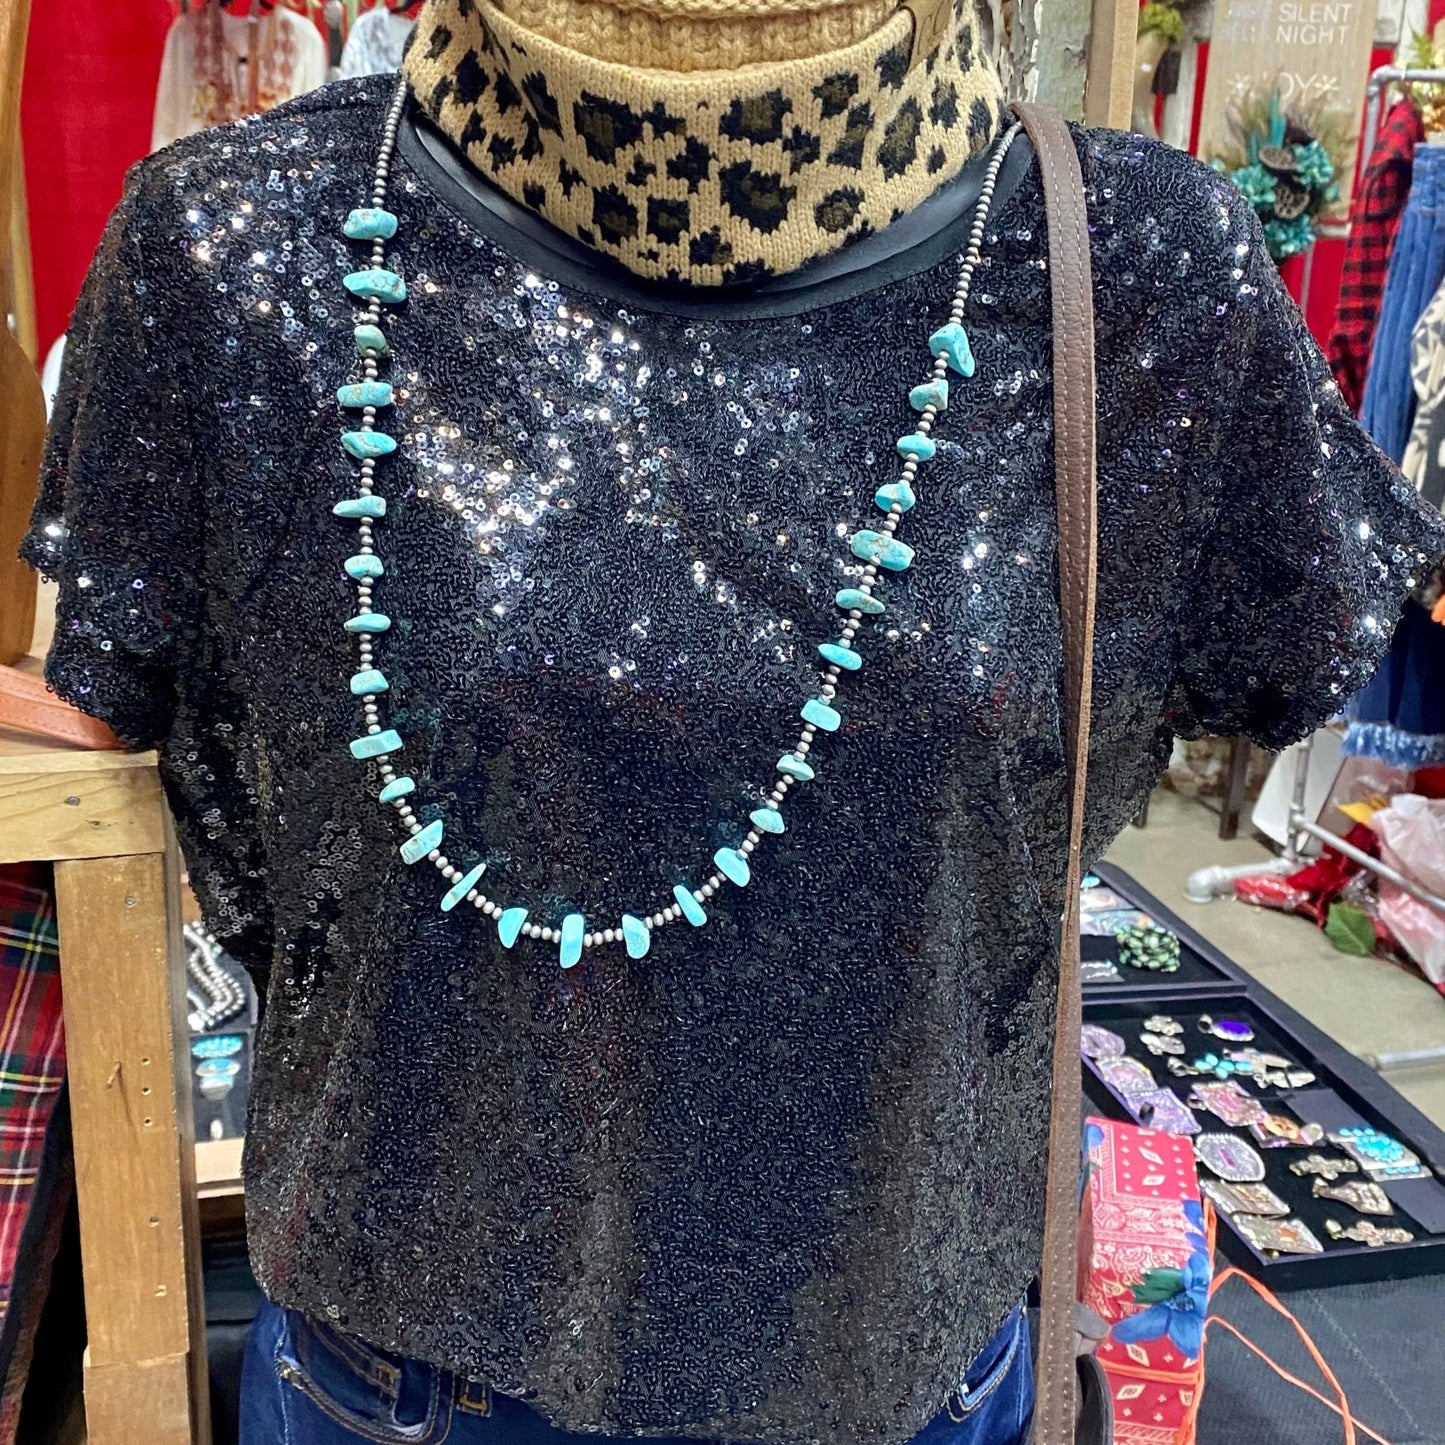 Black sequin fully lined top. This top is so sparkly and the perfect bit of glam to add in to your wardrobe. Style it alone or with a fun jacket or vest at your next night out on the town or celebration. Made in the USA!   Sizing Information:   Fabric: 95% Polyester 5% Spandex   Runs True To Size   Small - 2/4 Medium - 6/8 Large - 10/12 XL - 12/14